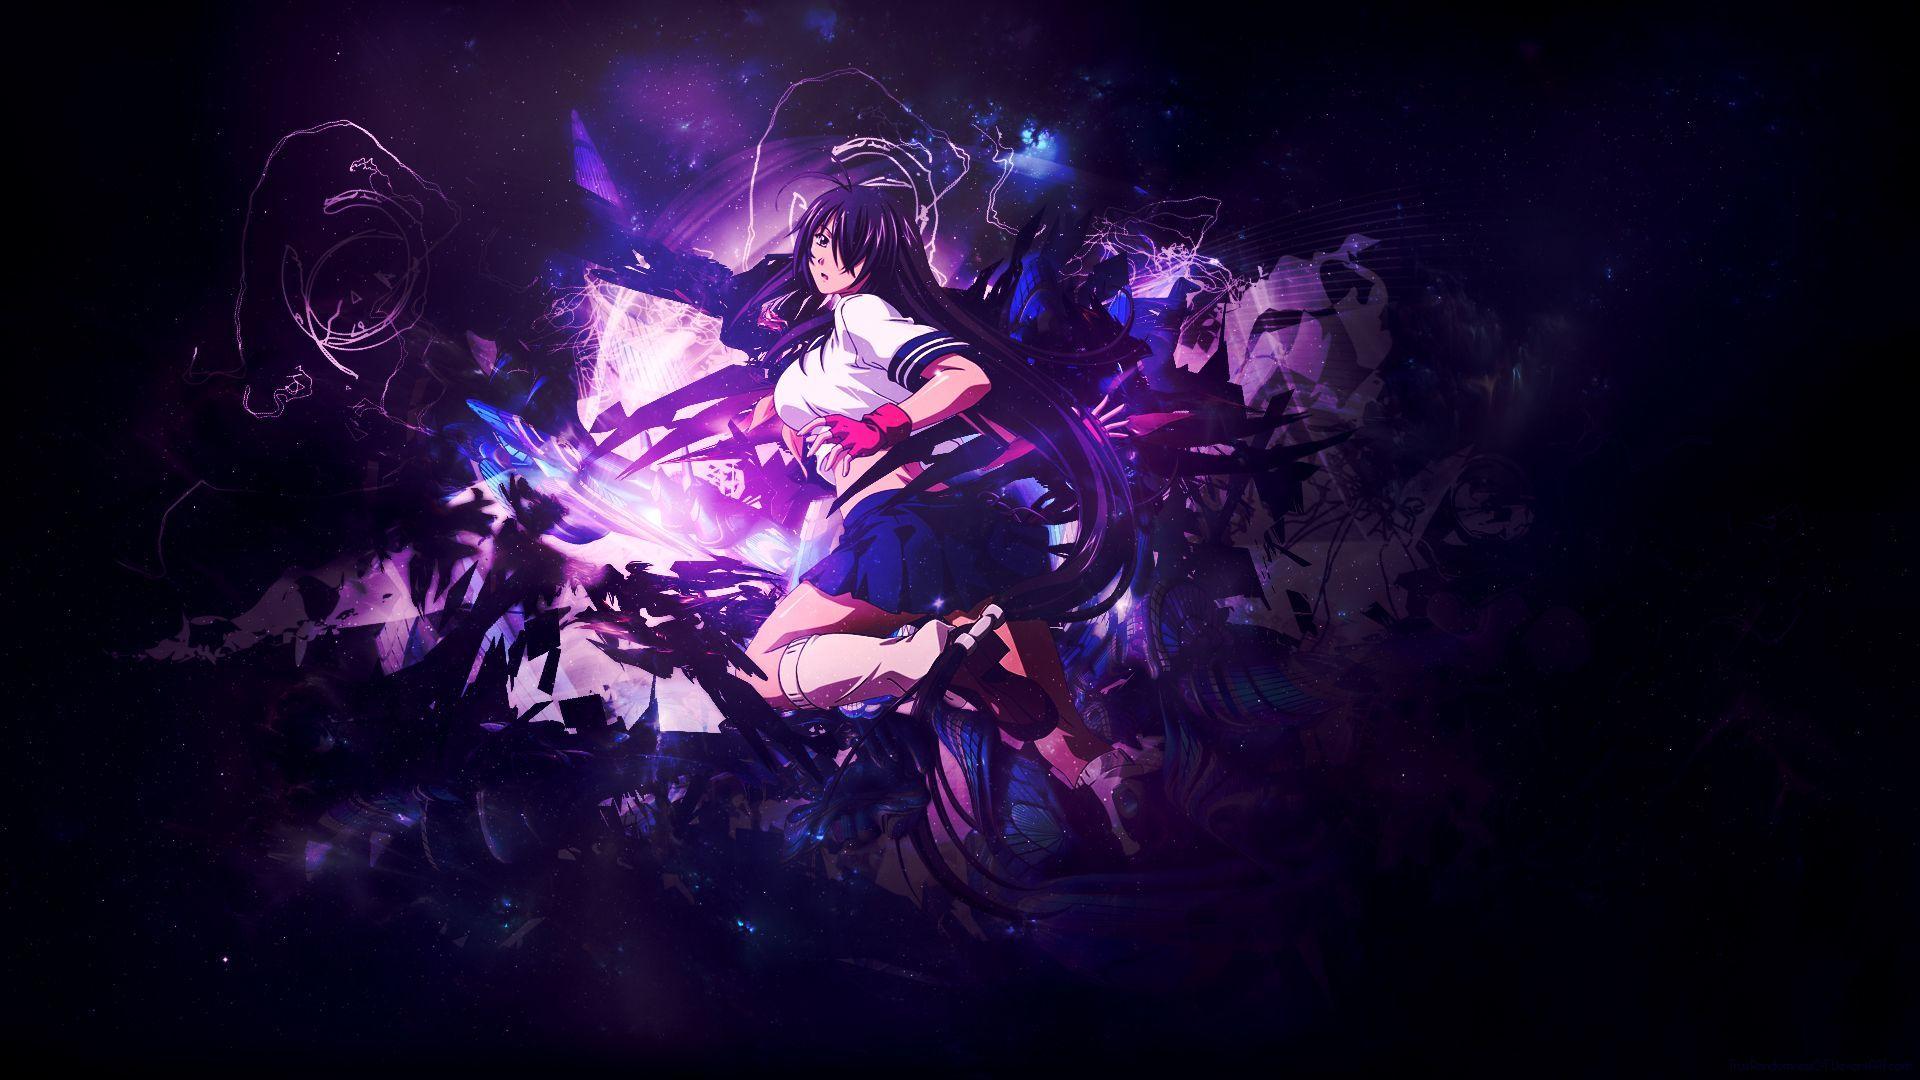 1080p Anime Girls Purple Wallpapers - Wallpaper Cave